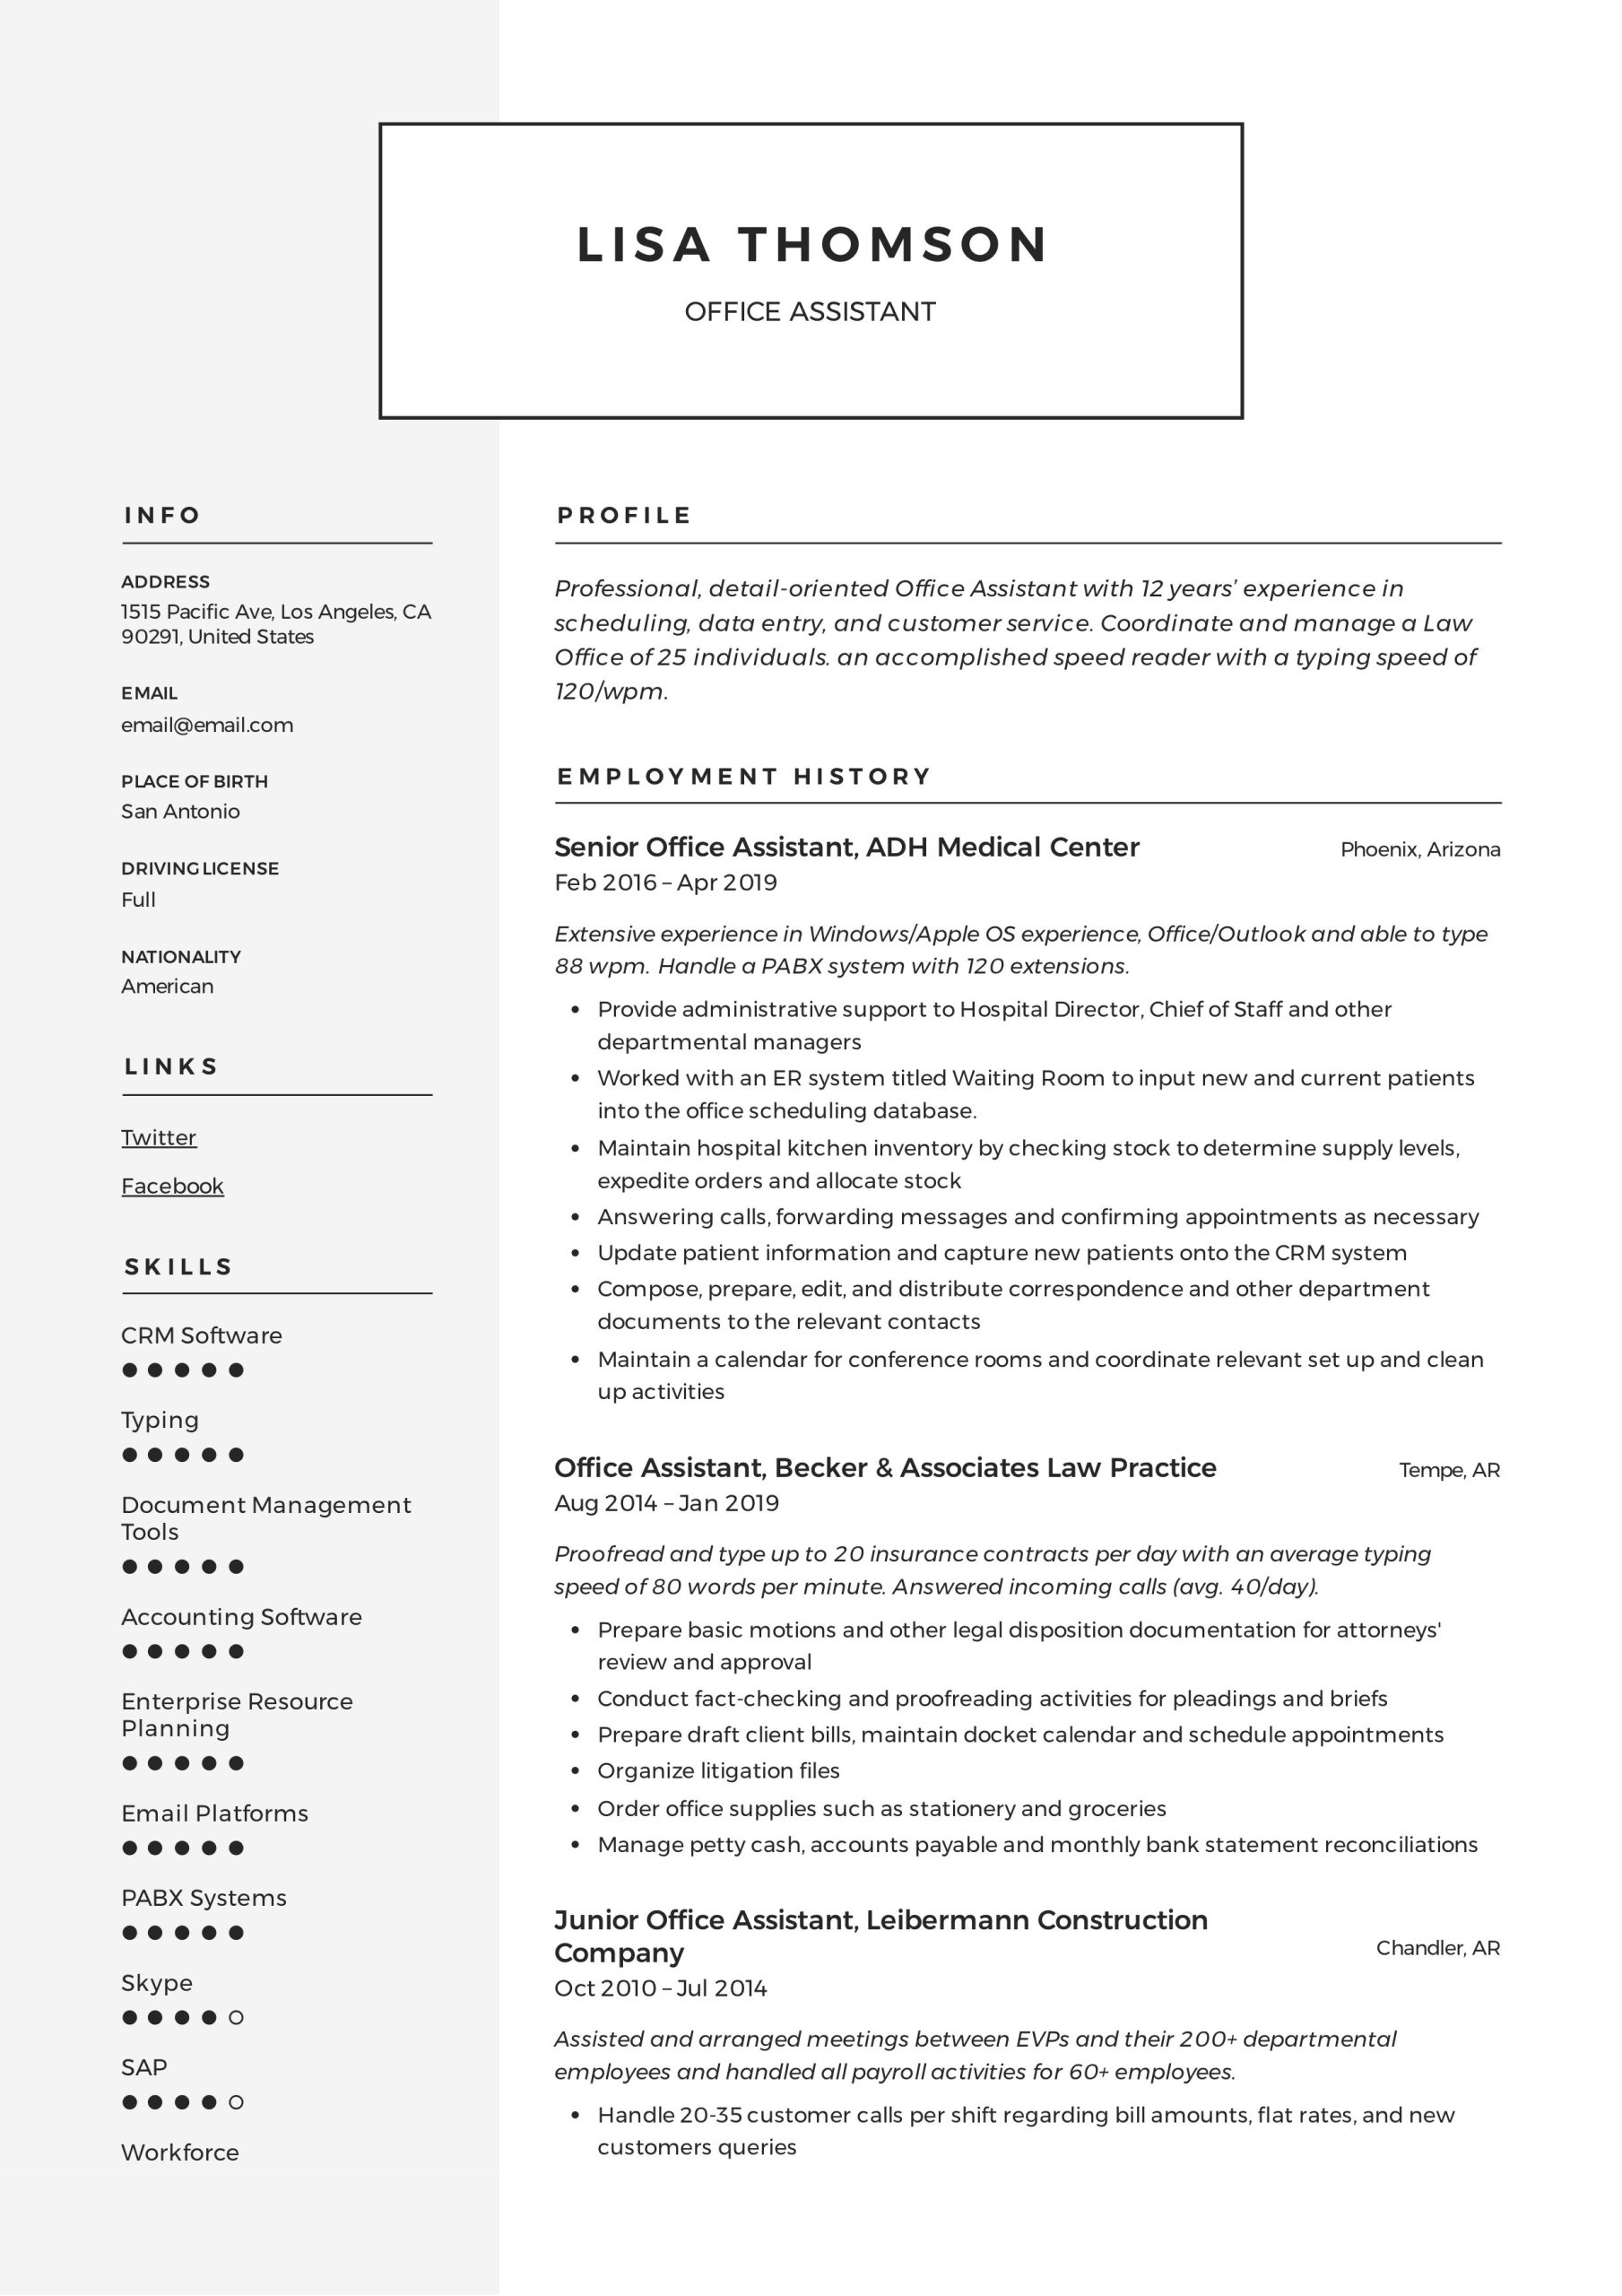 Clerk to Office assistant Resume Sample Office assistant Resume   Writing Guide 12 Resume Templates 2020